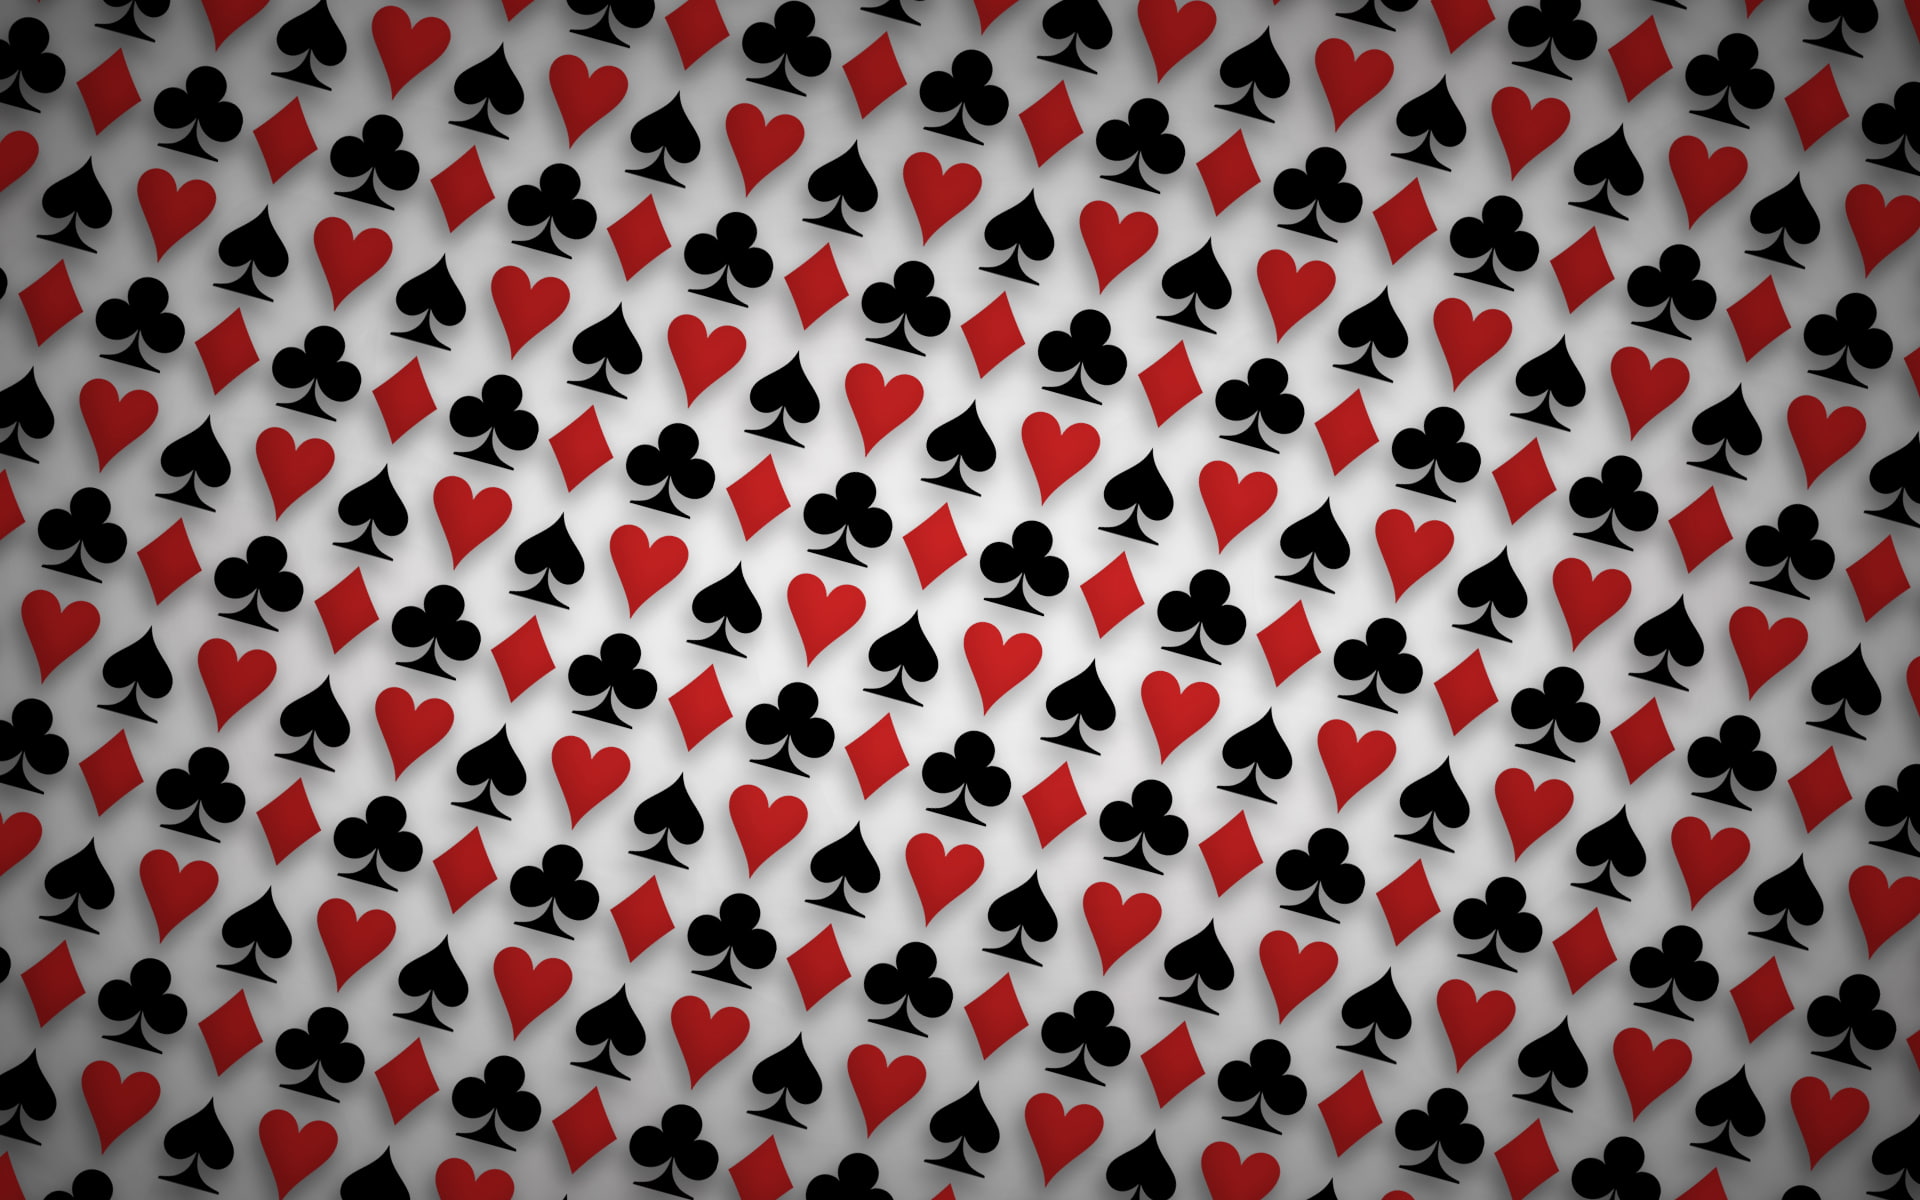 background, cards, hearts, pattern, spades, suit, texture